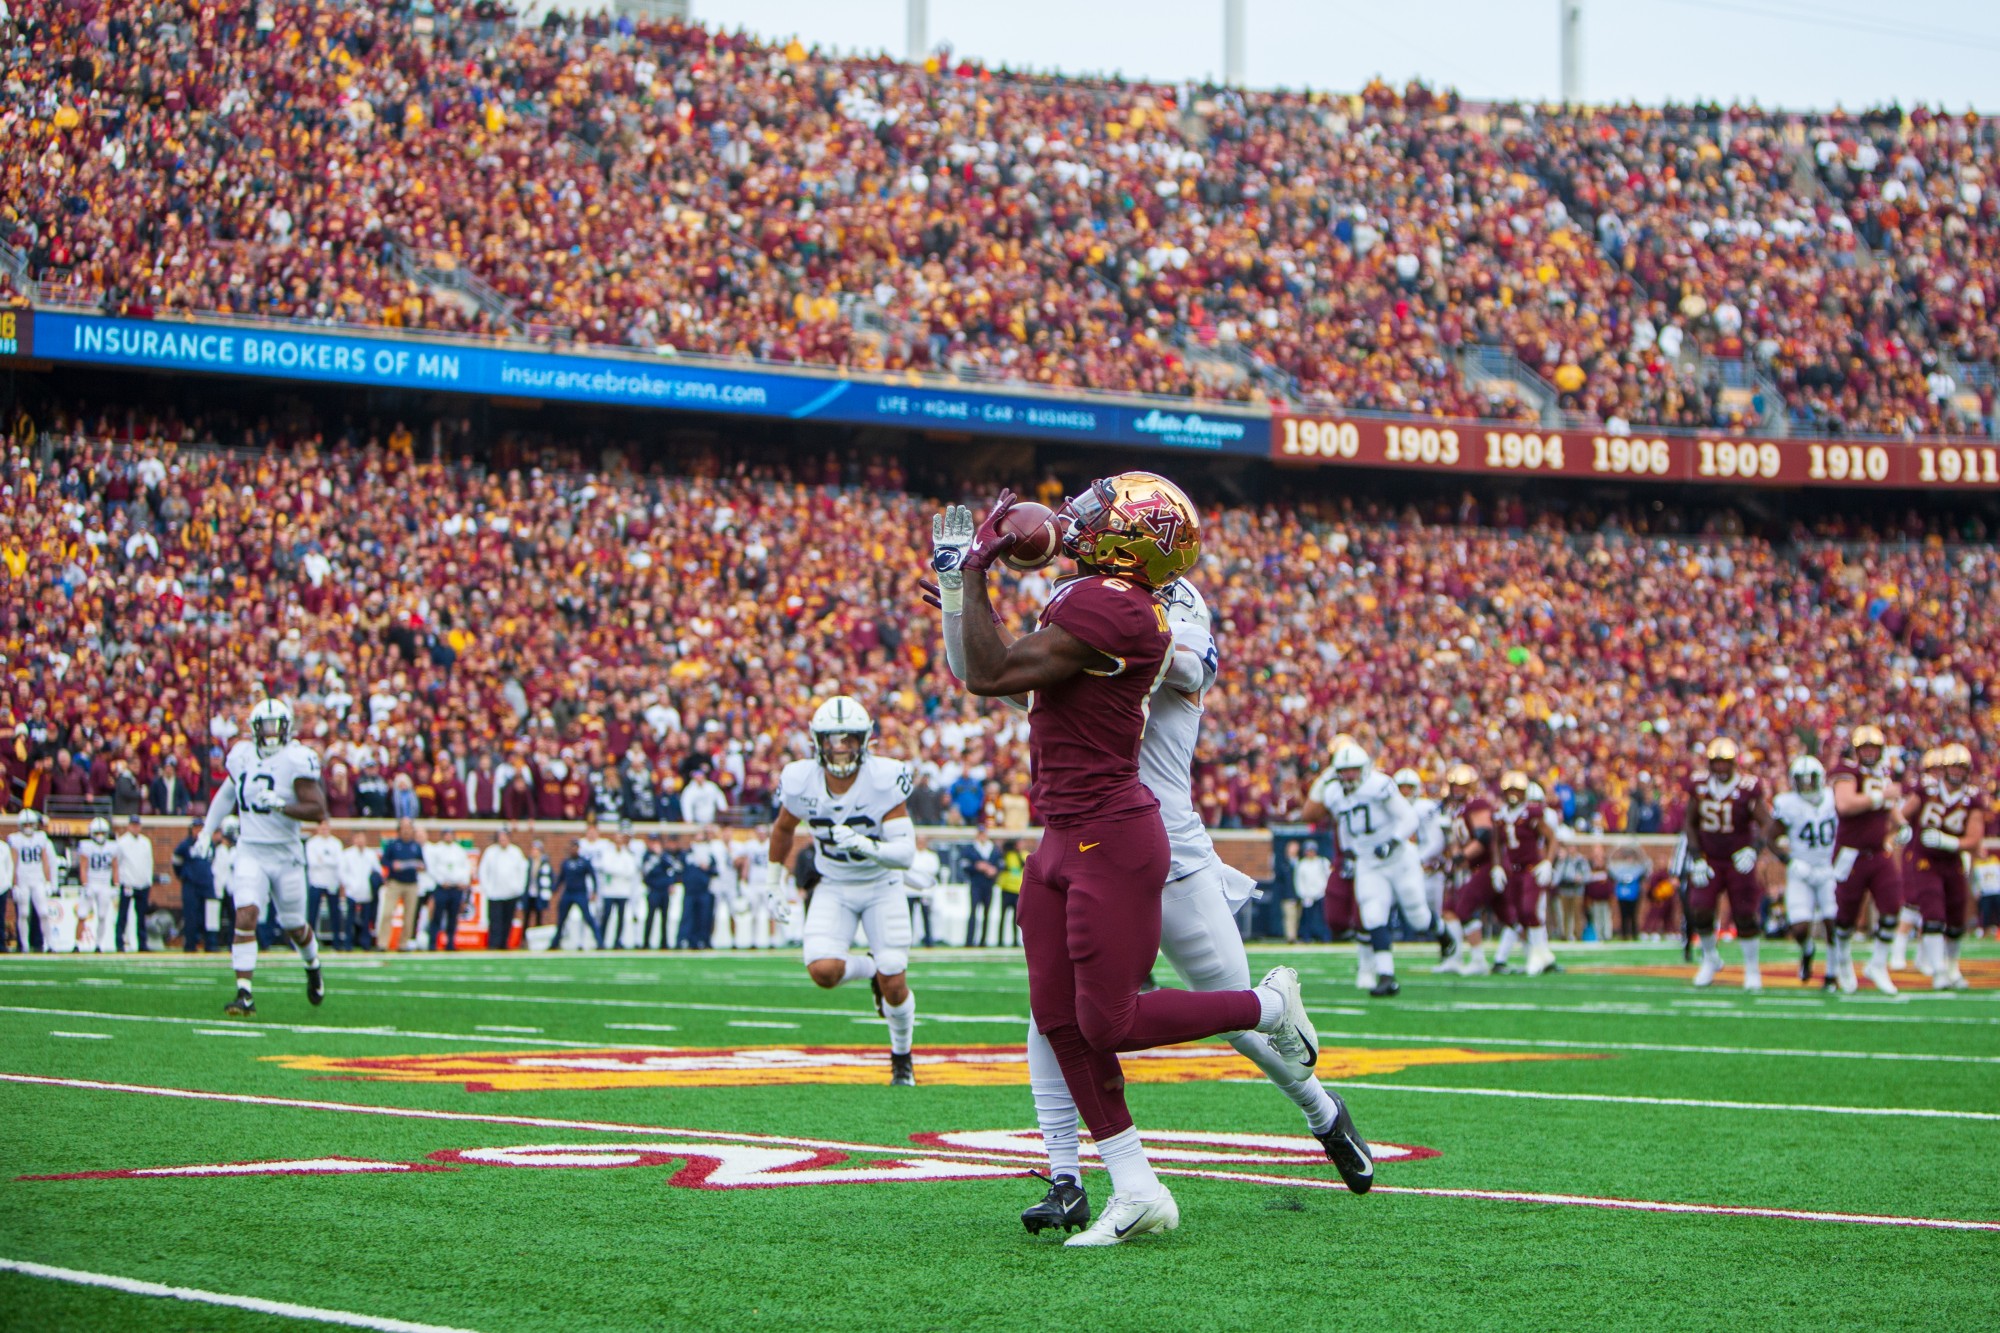 Wide receiver Tyler Johnson make a catch at TCF Bank Stadium on Saturday, Nov. 9. The Gophers defeated Penn State 31-26 to bring their record to 9-0. A first since 1904. 